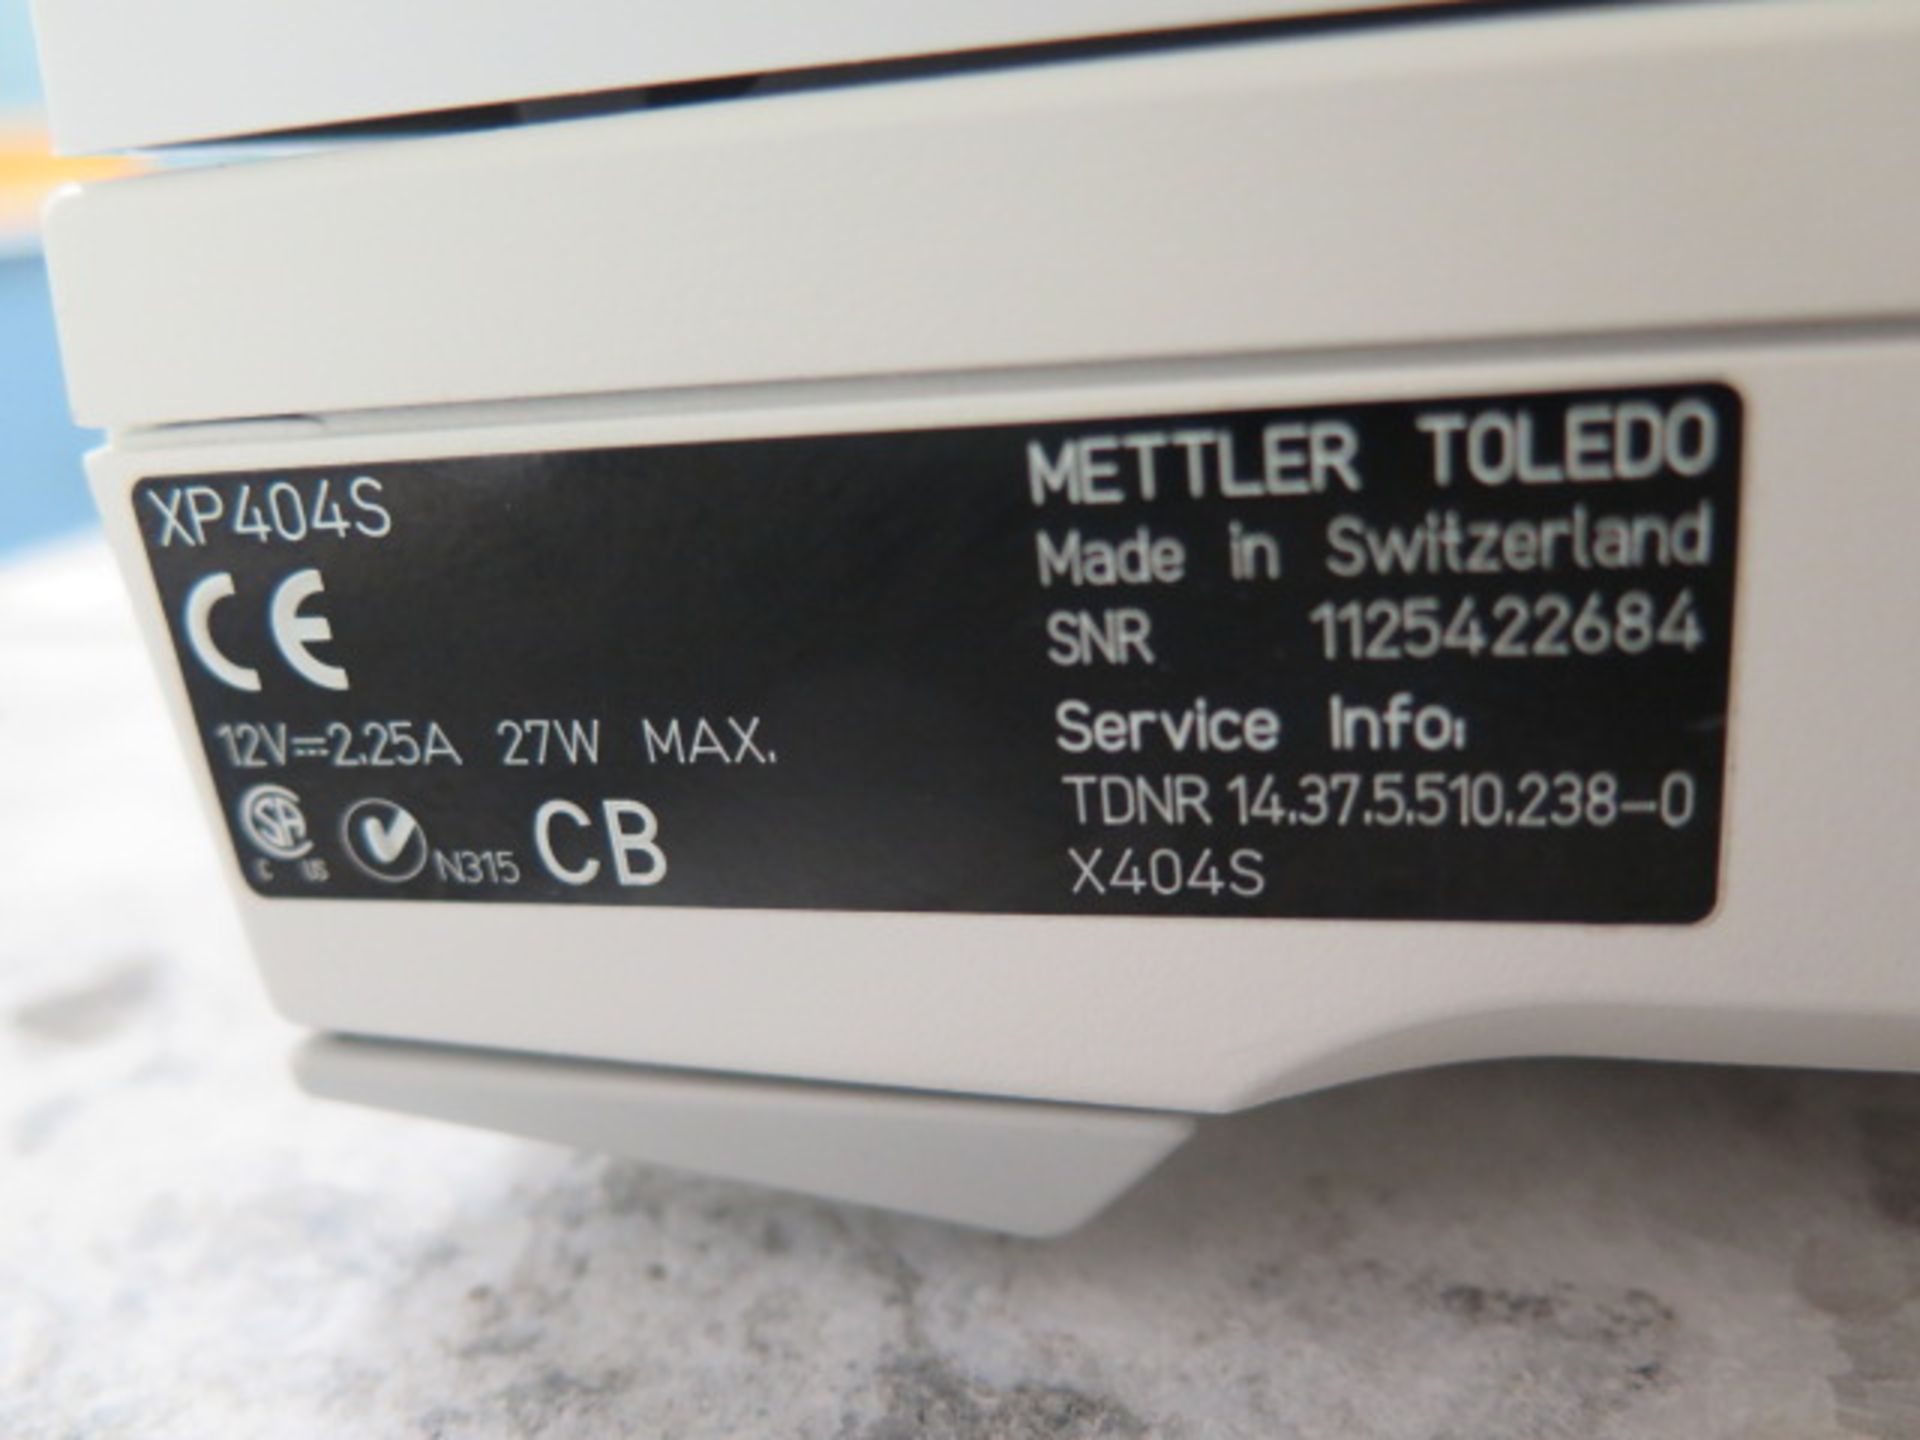 Mettler Toledo XP404S 400g Digital Balance Scale (NO POWER SUPPLY) (SOLD AS-IS - NO WARRANTY) - Image 10 of 10